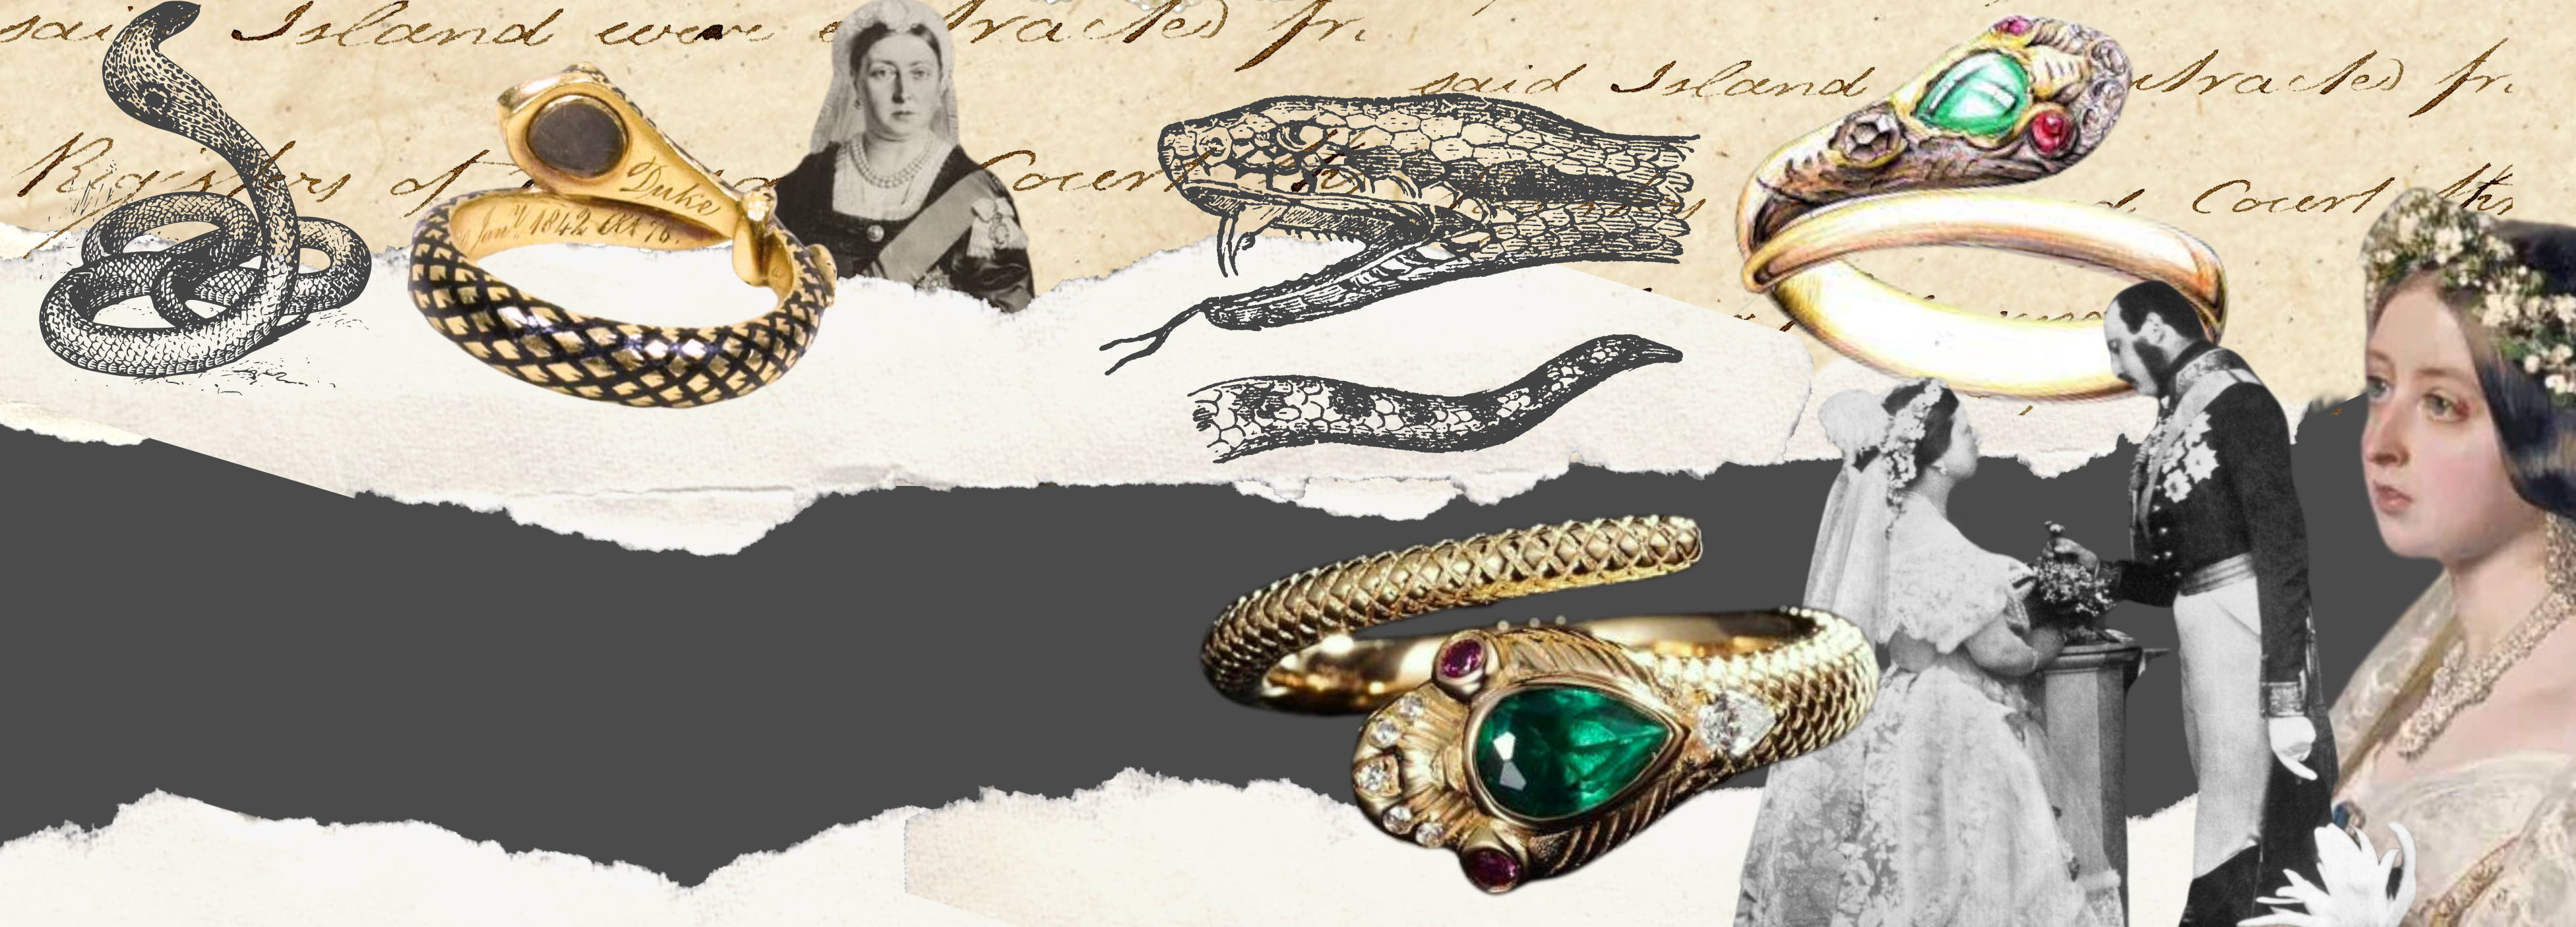 Queen Victoria and Jewelry, Jewelry